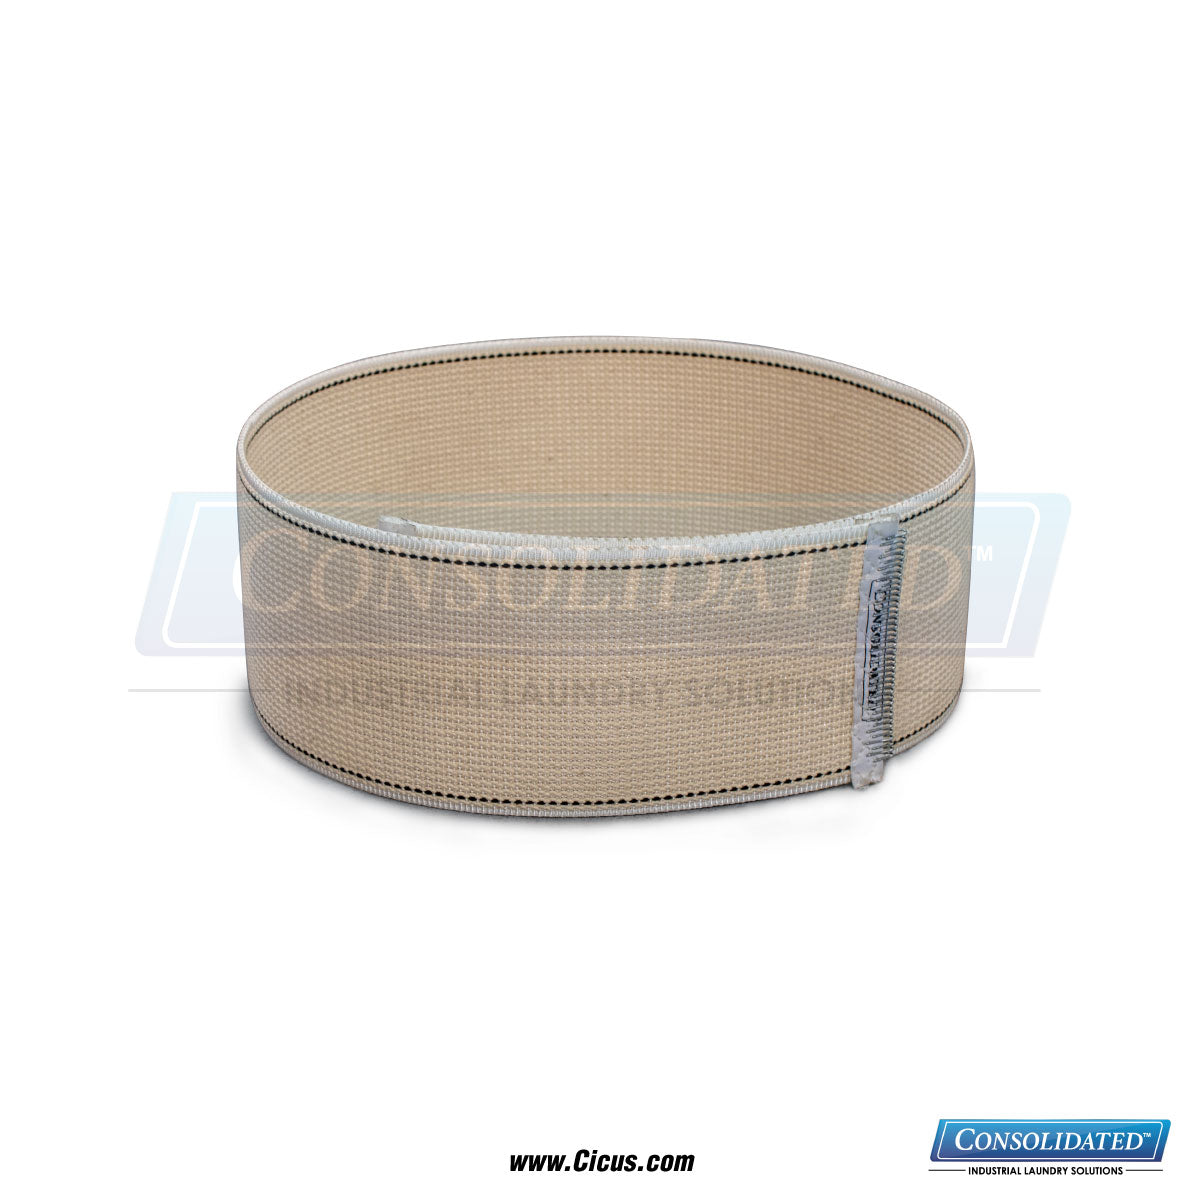 CIC Exclusive Chicago Dryer Canvas Ribbon - 2" x 105" (1001-004)